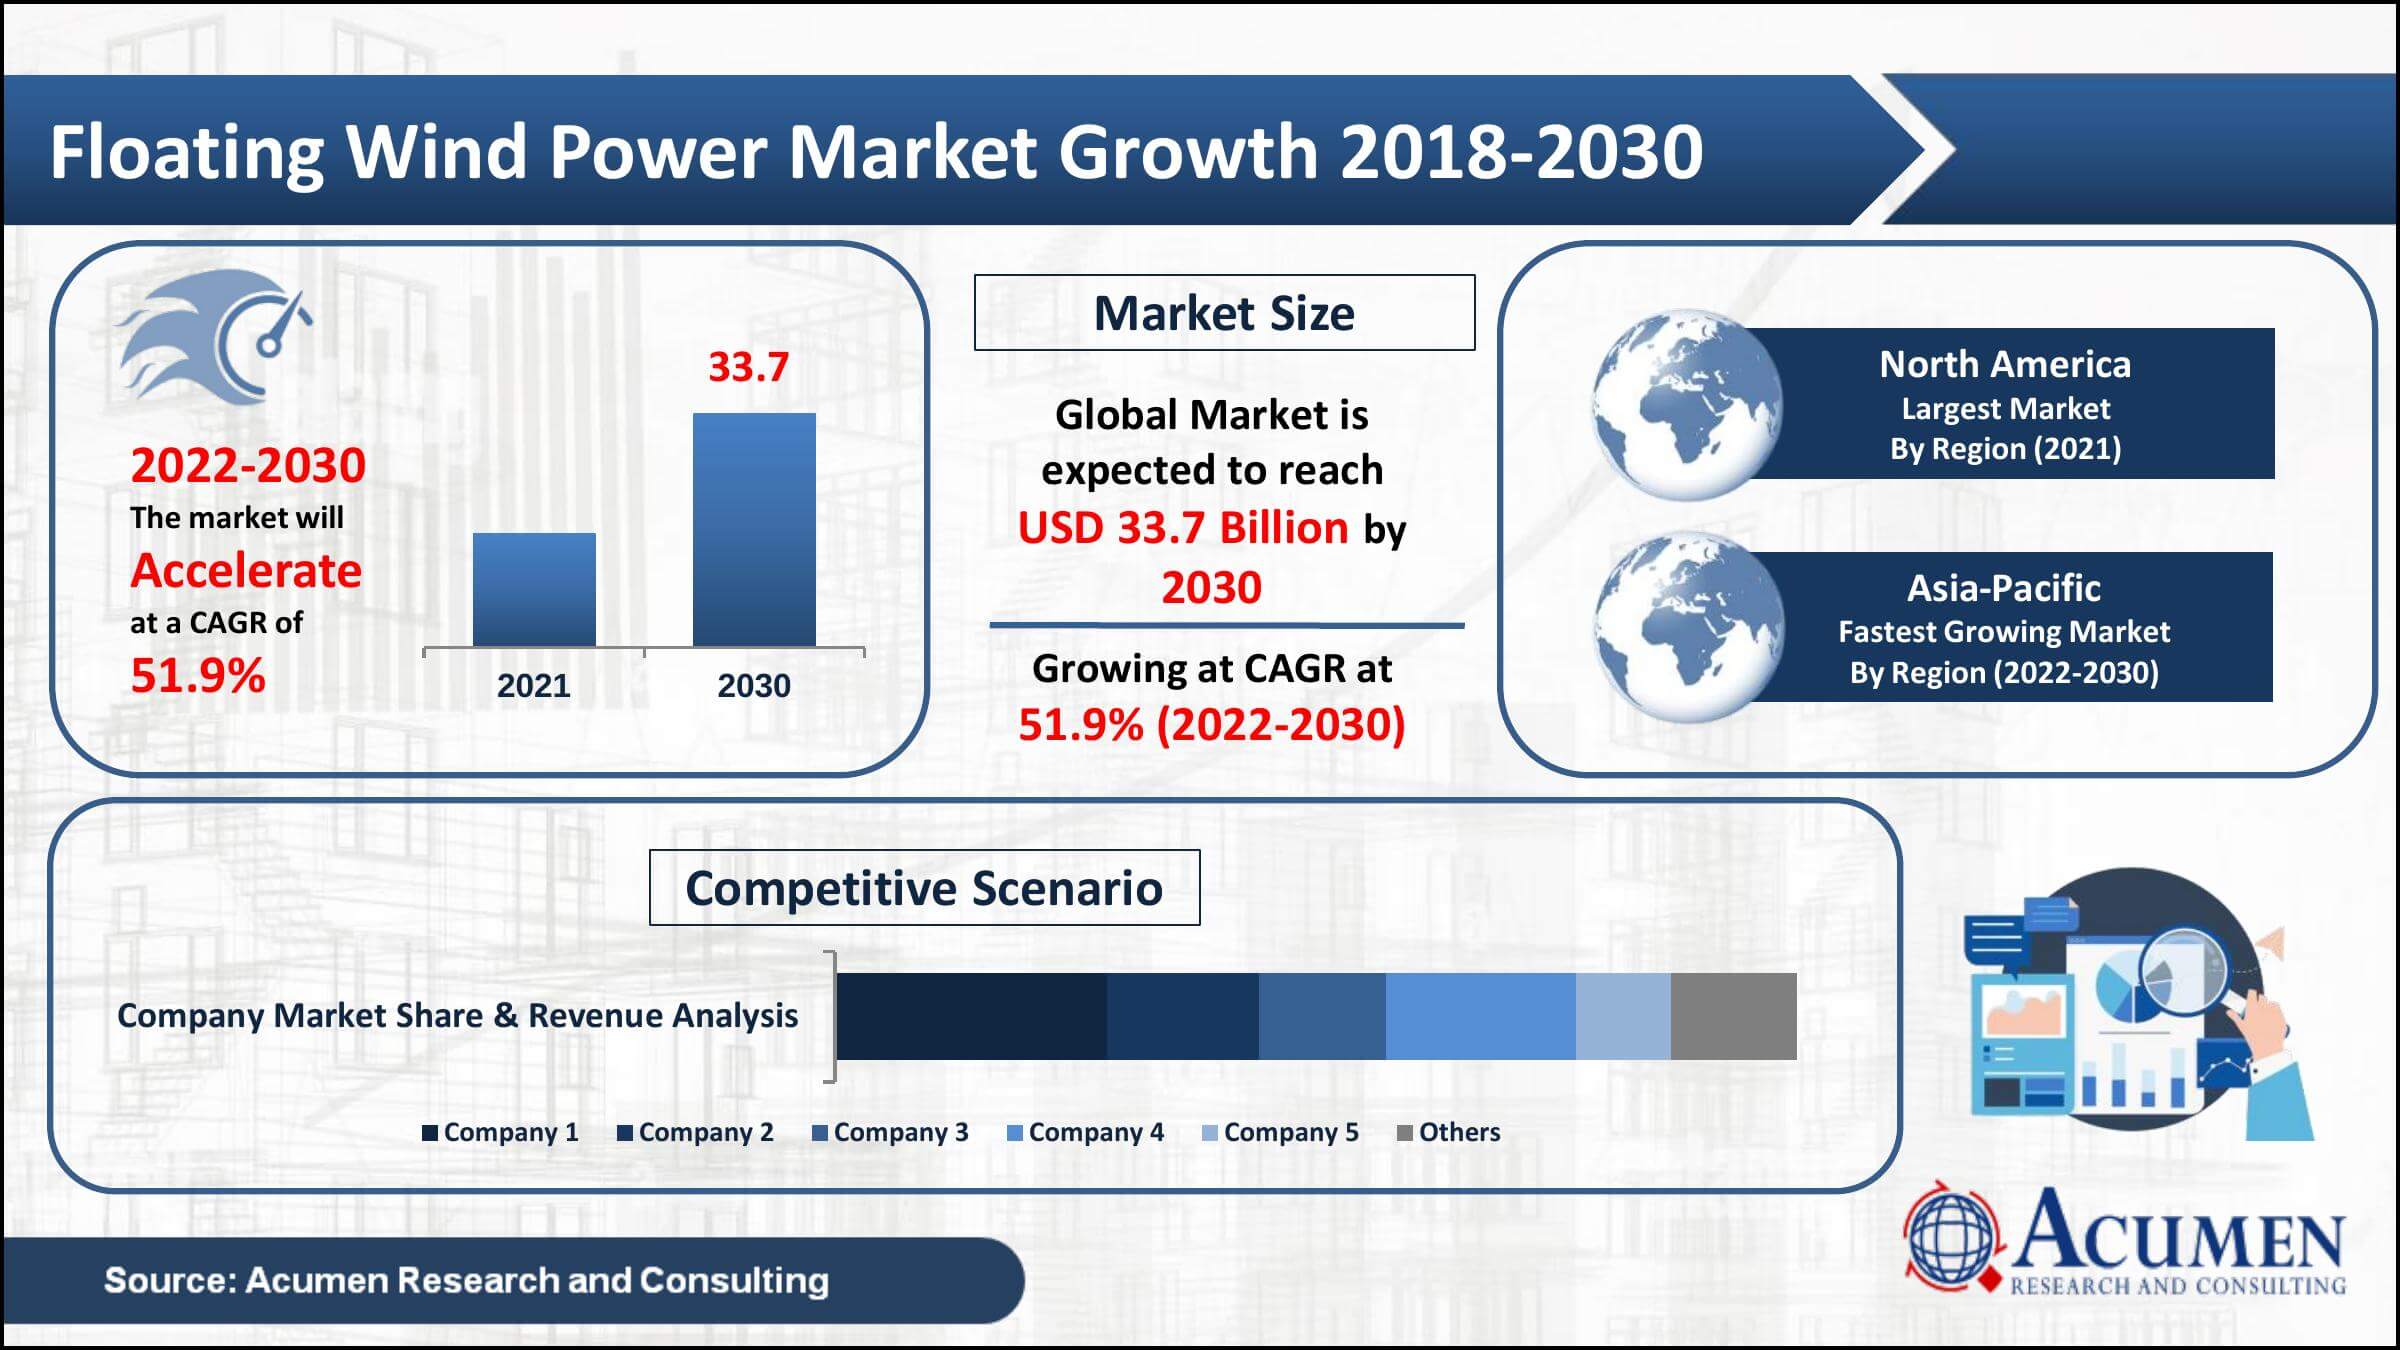 Floating Wind Power Market value set to reach USD 33.7 Billion by year 2030 at 51.9% CAGR